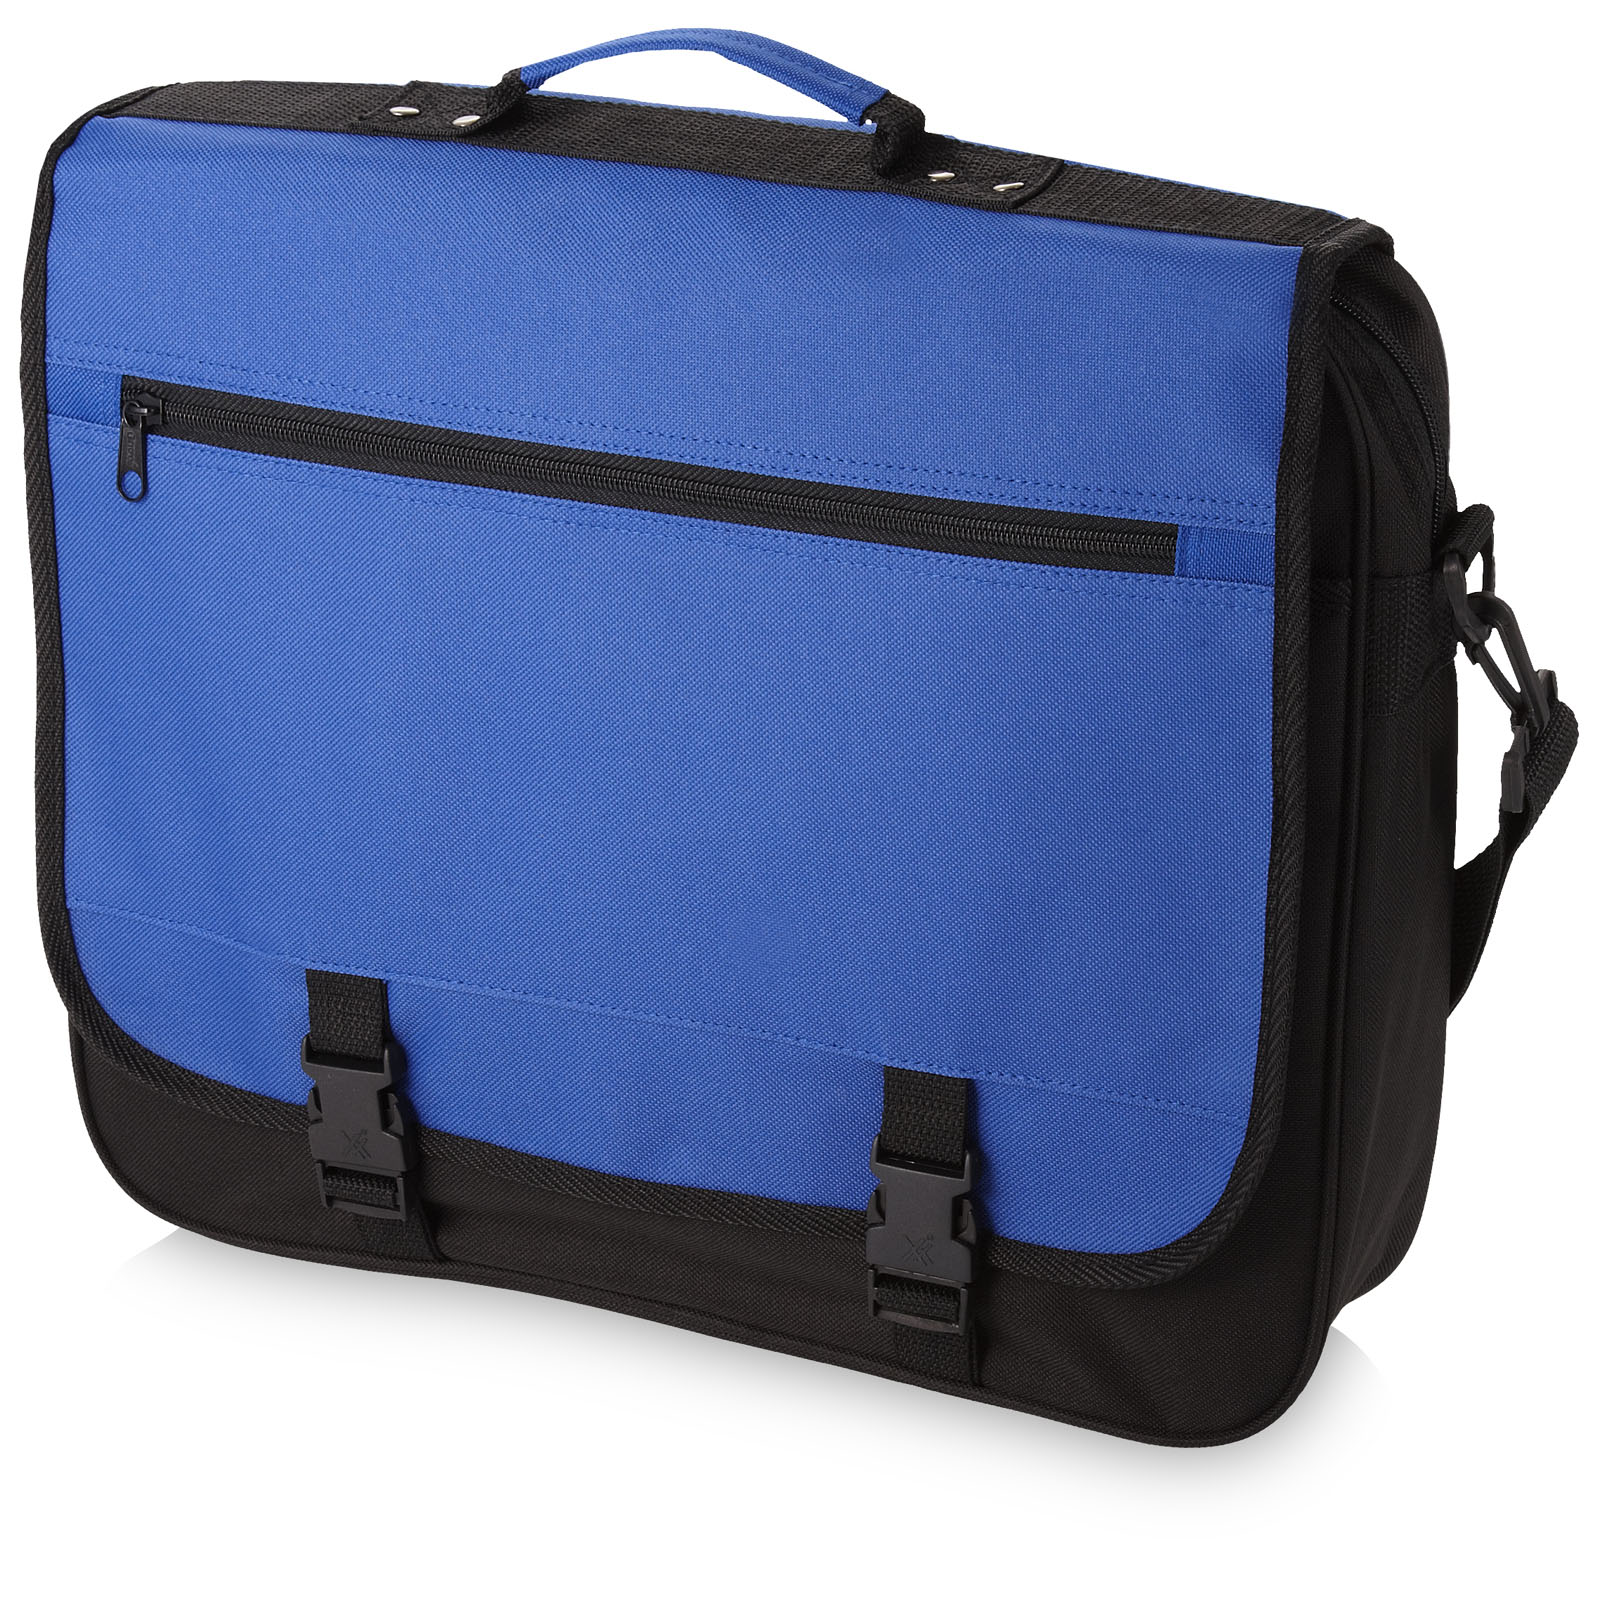 Bags - Anchorage conference bag 11L